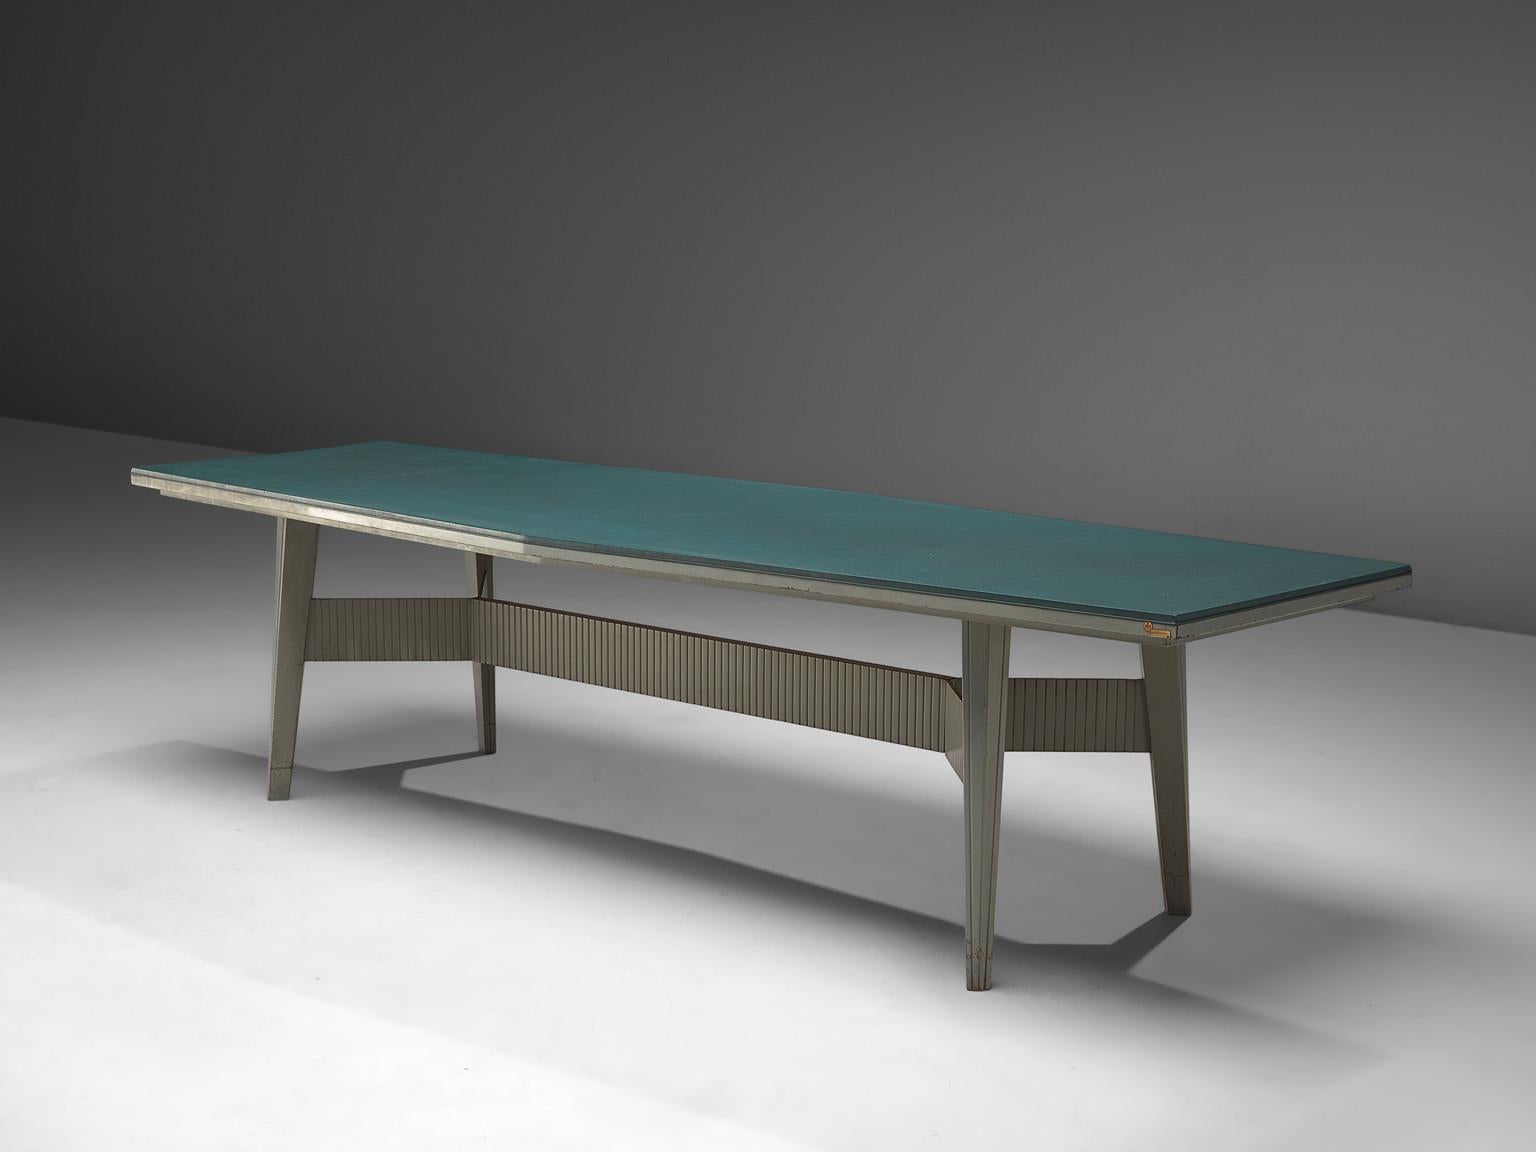 Mobiltecnica, work table, metal and leatherette, Italy, 1970s

This three meter long conference table is made in Turin, Italy in the 1970s. The table features a metal table, with a turquoise leatherette tabletop which is boat shaped. The base